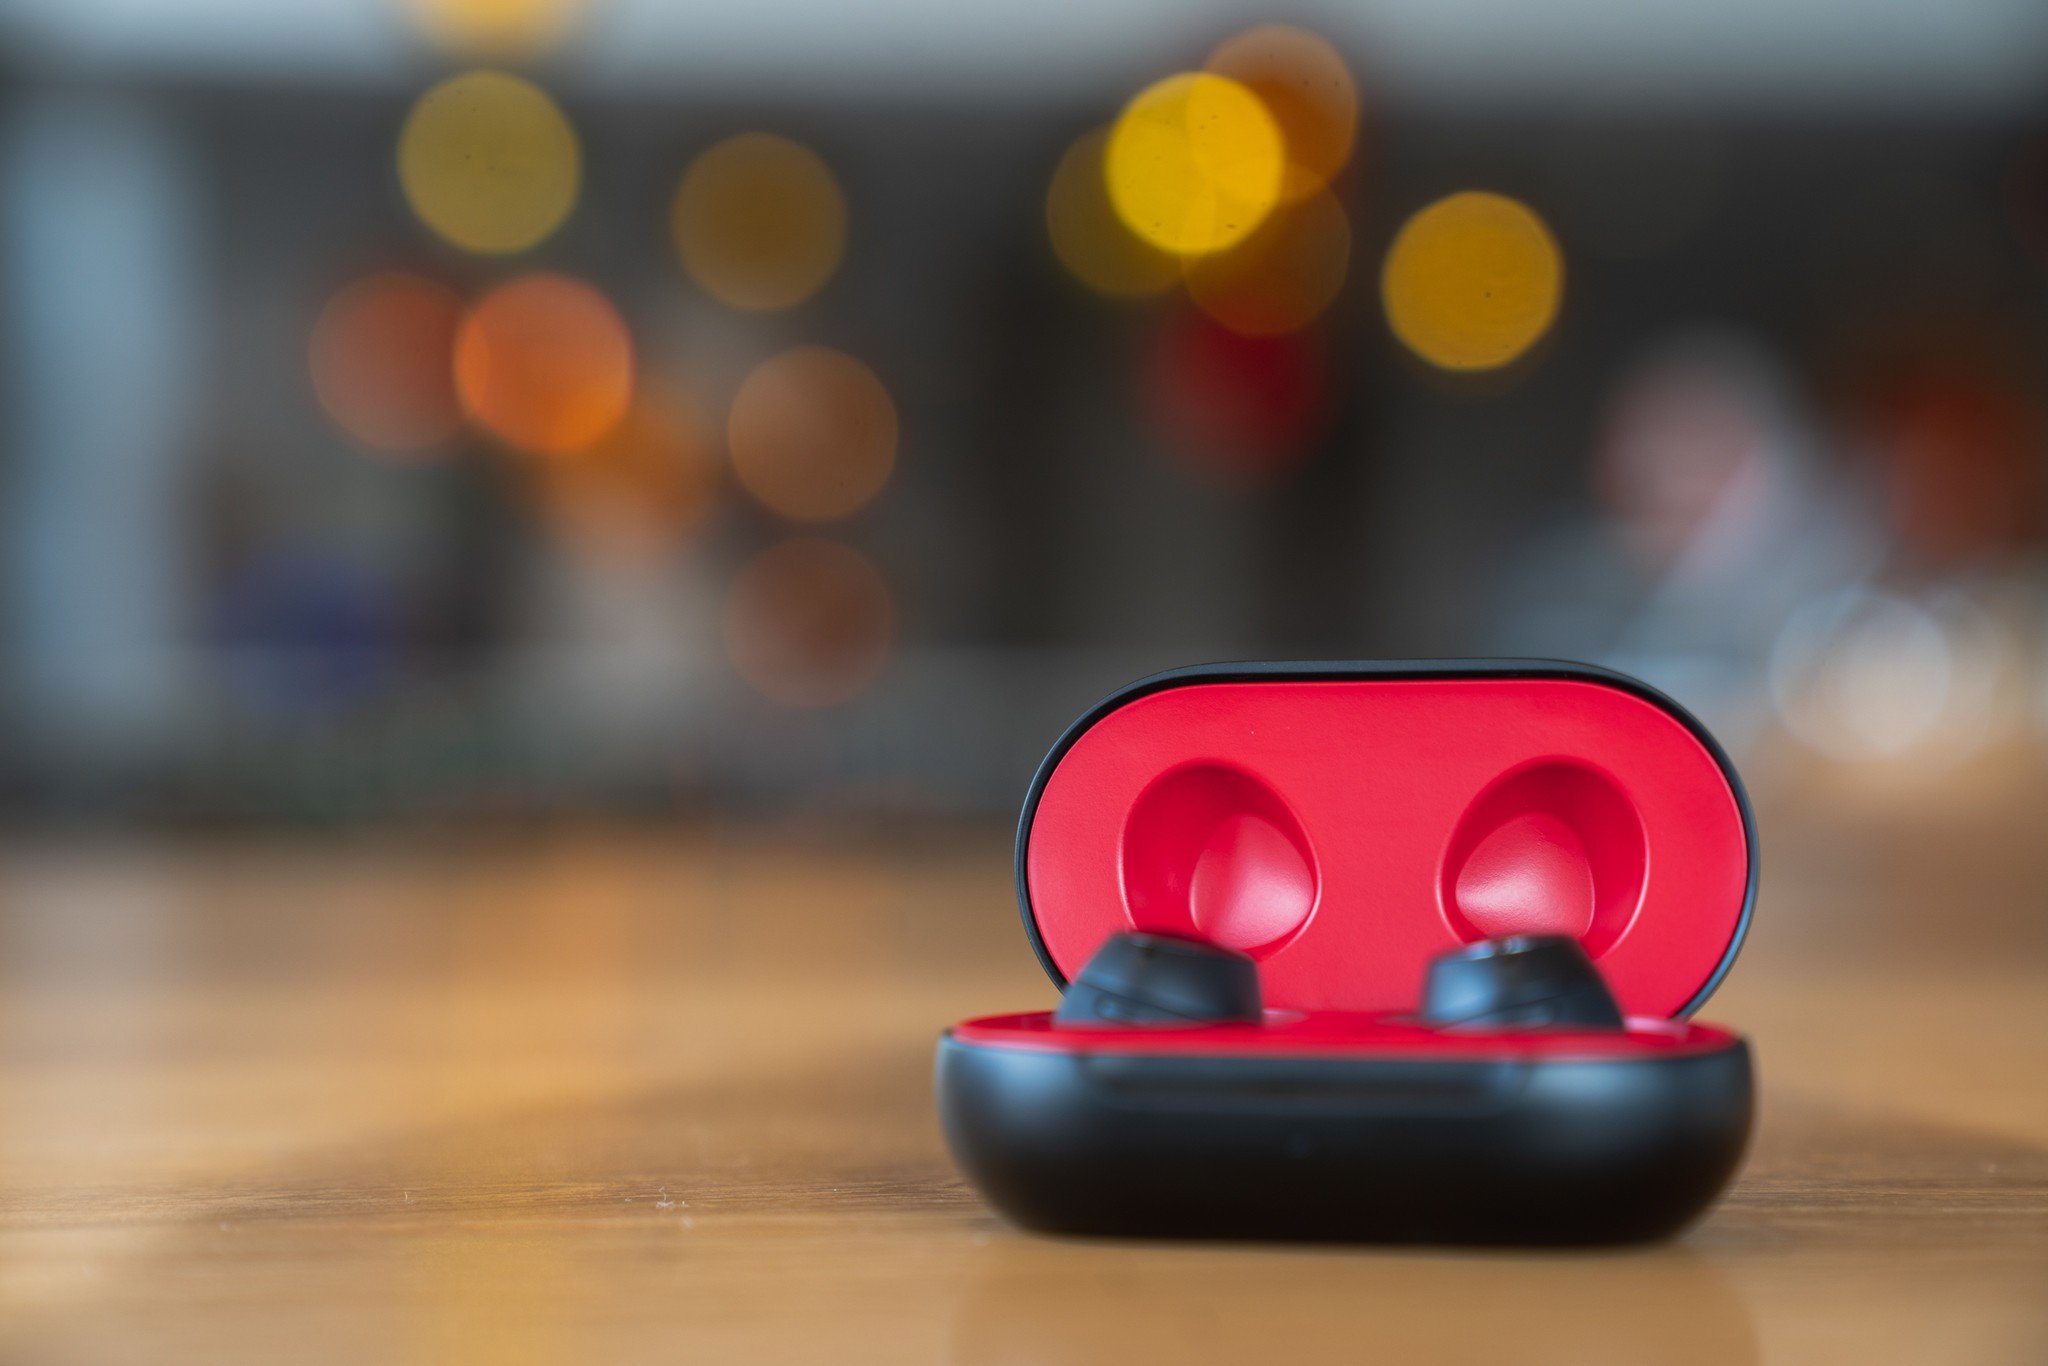 Special edition Galaxy Buds from the Galaxy Note 10+ Star Wars Edition